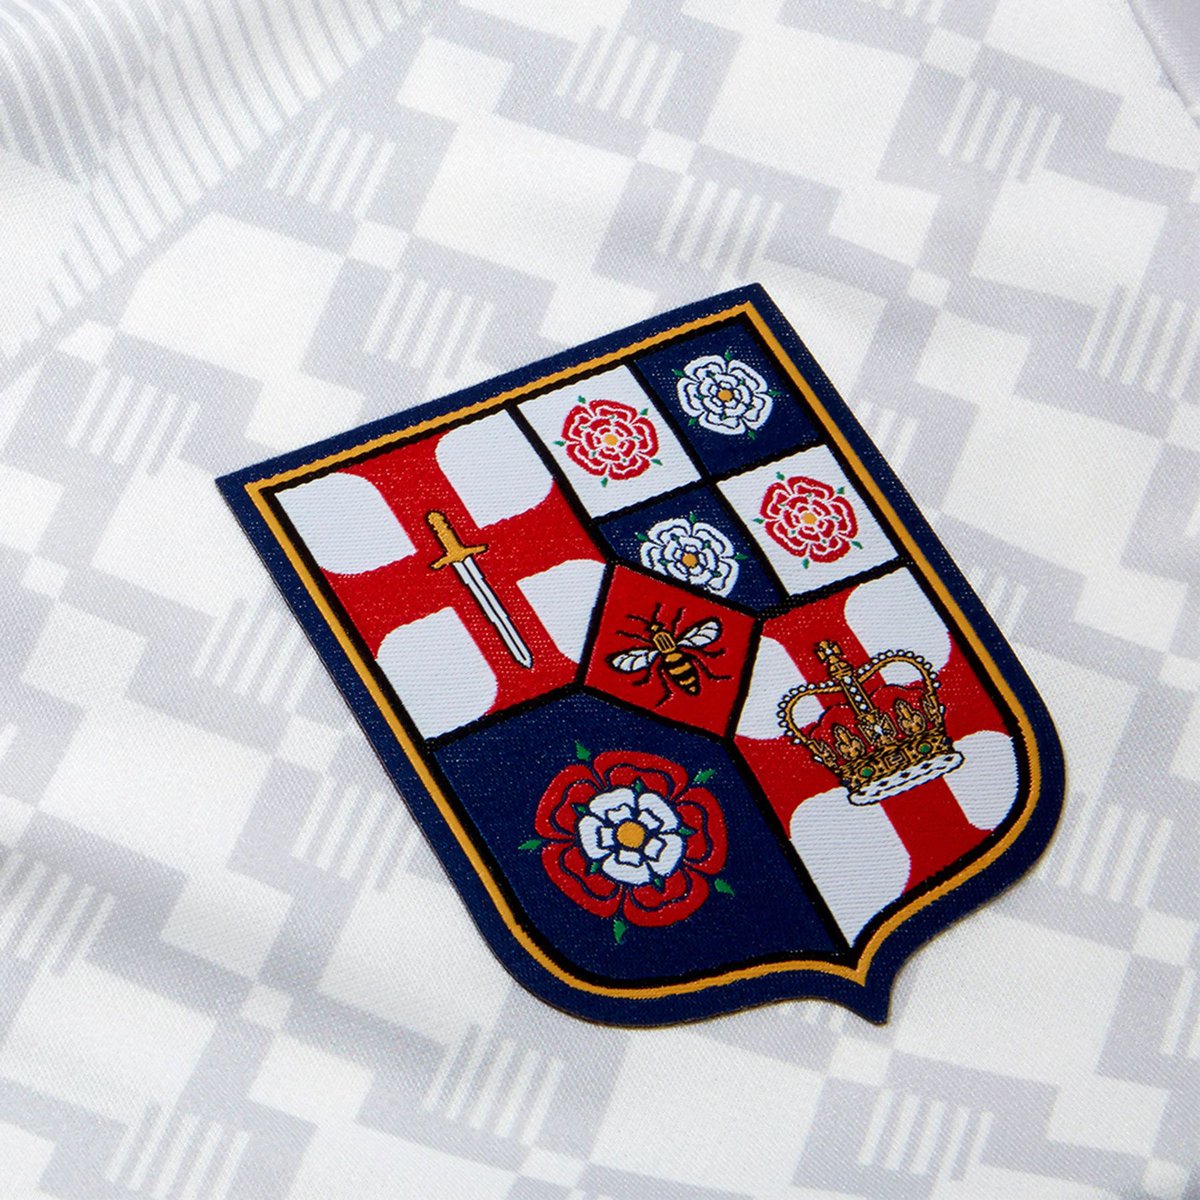 The England Iconic Graphic Jersey from Umbro's 'United by Umbro' collection celebrates the unifying spirit of football.

Read more: footballshirtculture.com/lifestyle/engl…

#england #umbro #footballshirts #soccerjersey #newkits